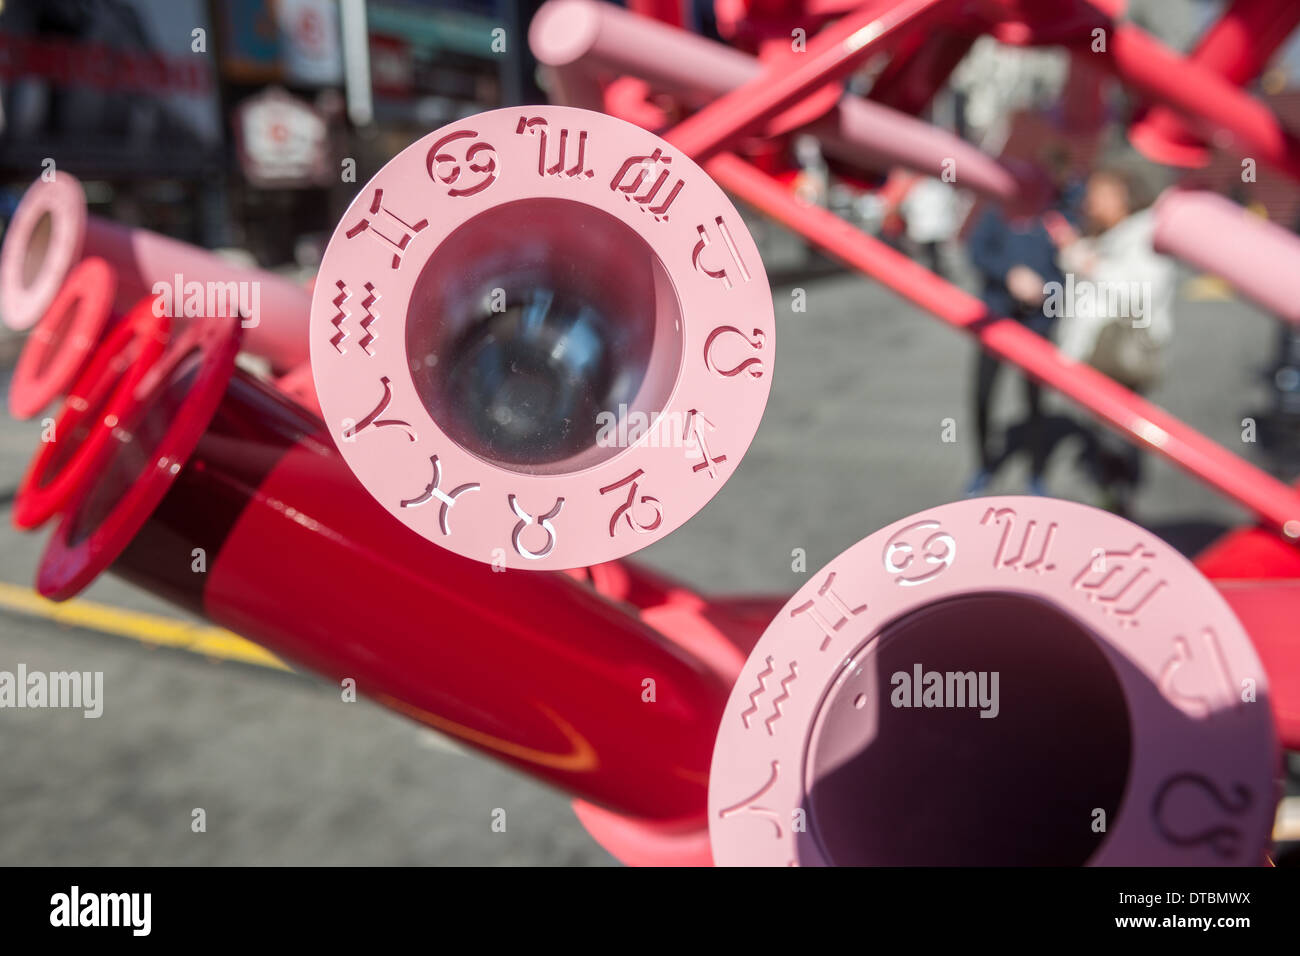 The periscopes of 'Match-Maker', created by the design studio Young Projects, in Times Square in New York Stock Photo